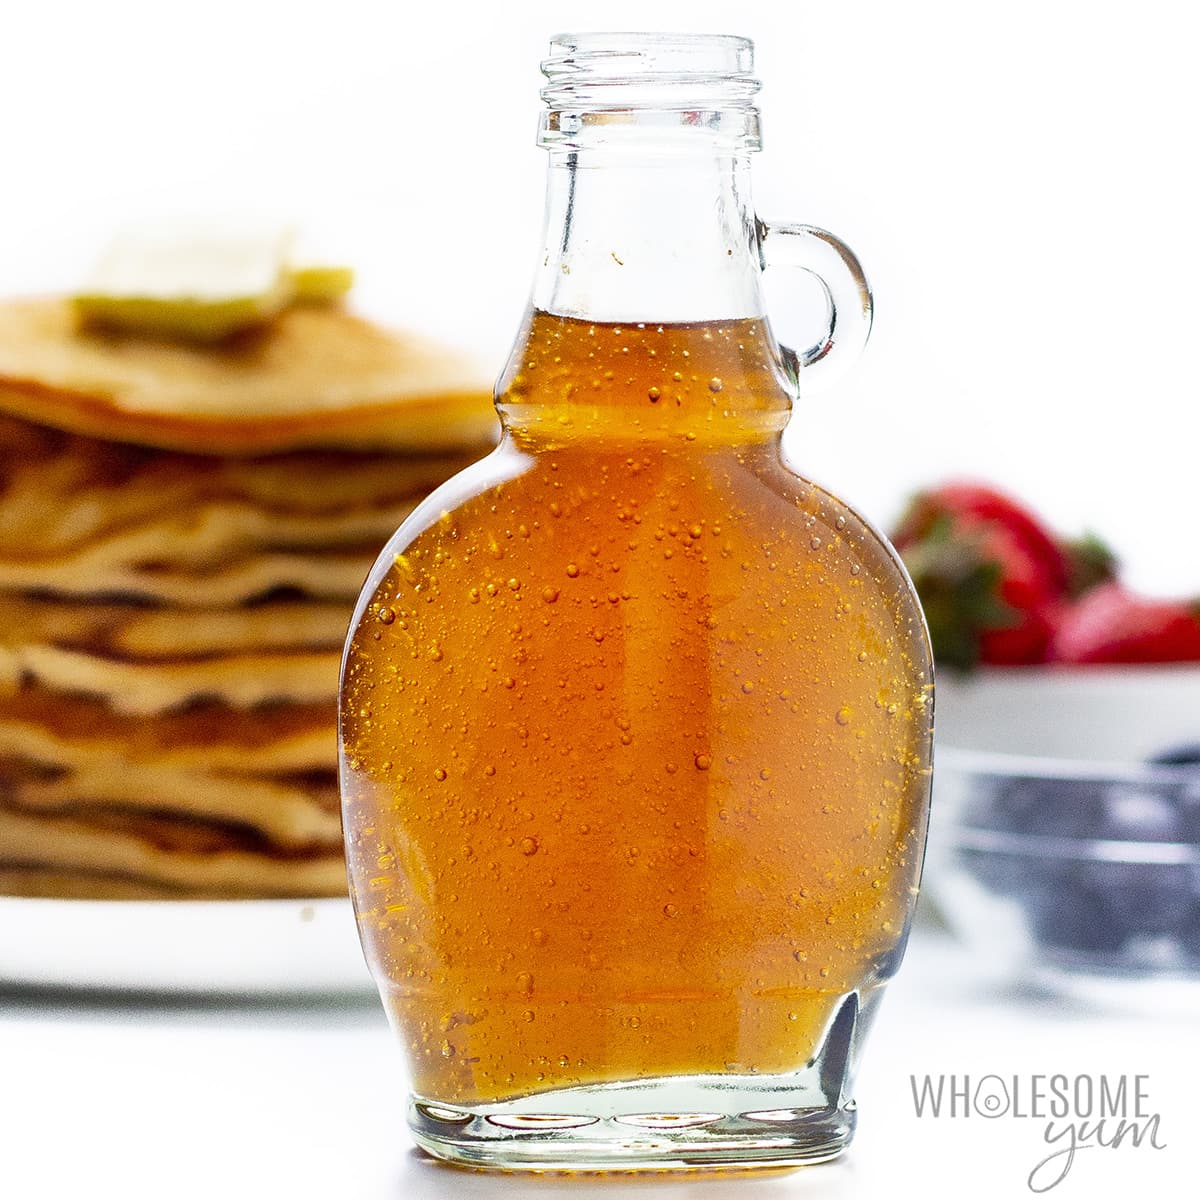 Keto syrup in a glass bottle.